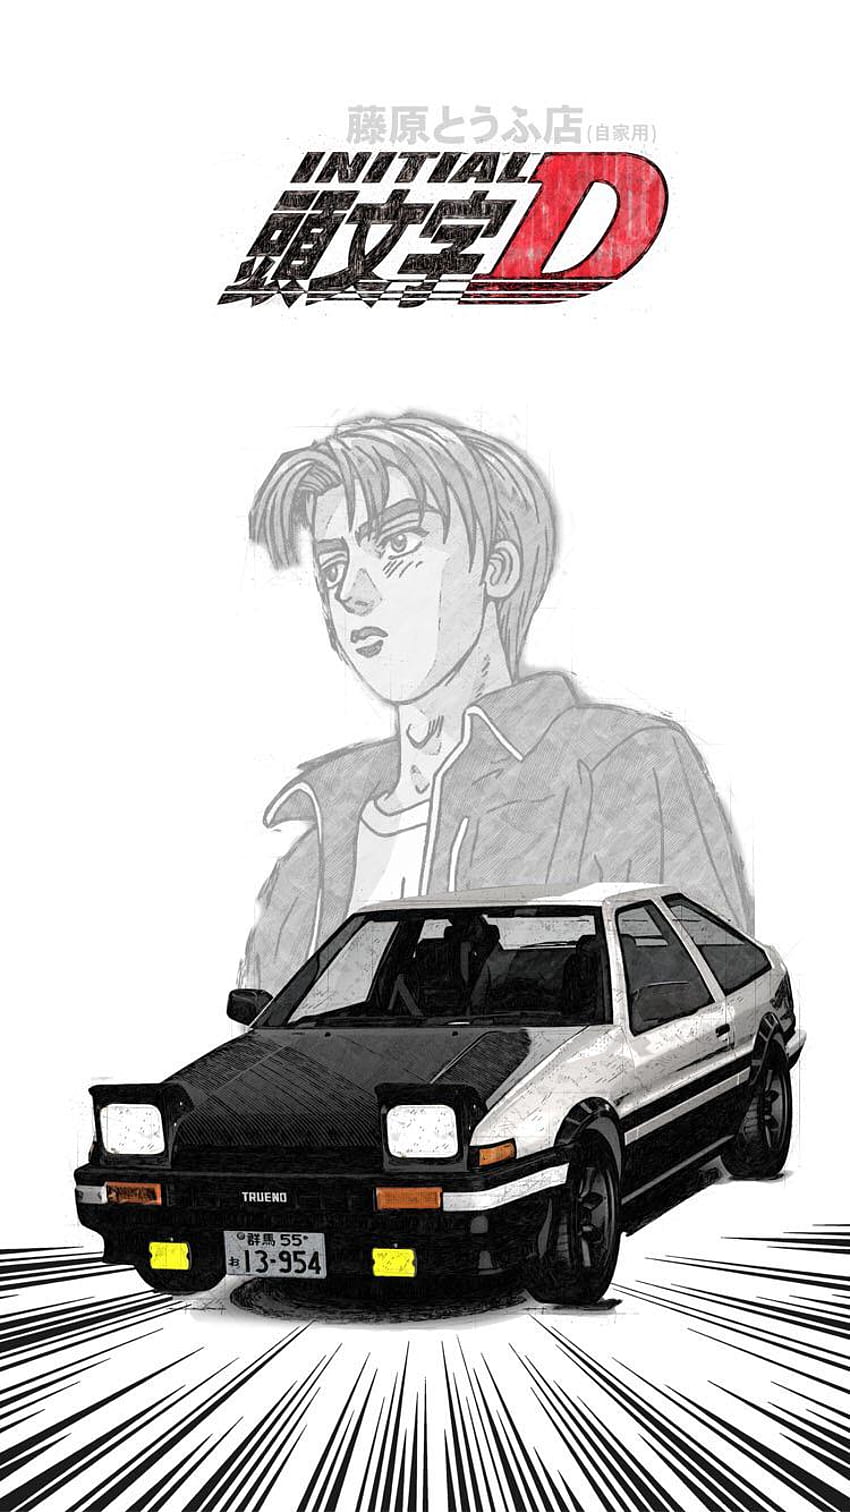 Initial D - Initial D iPhone - & Background, Toyota Ae86 HD phone wallpaper